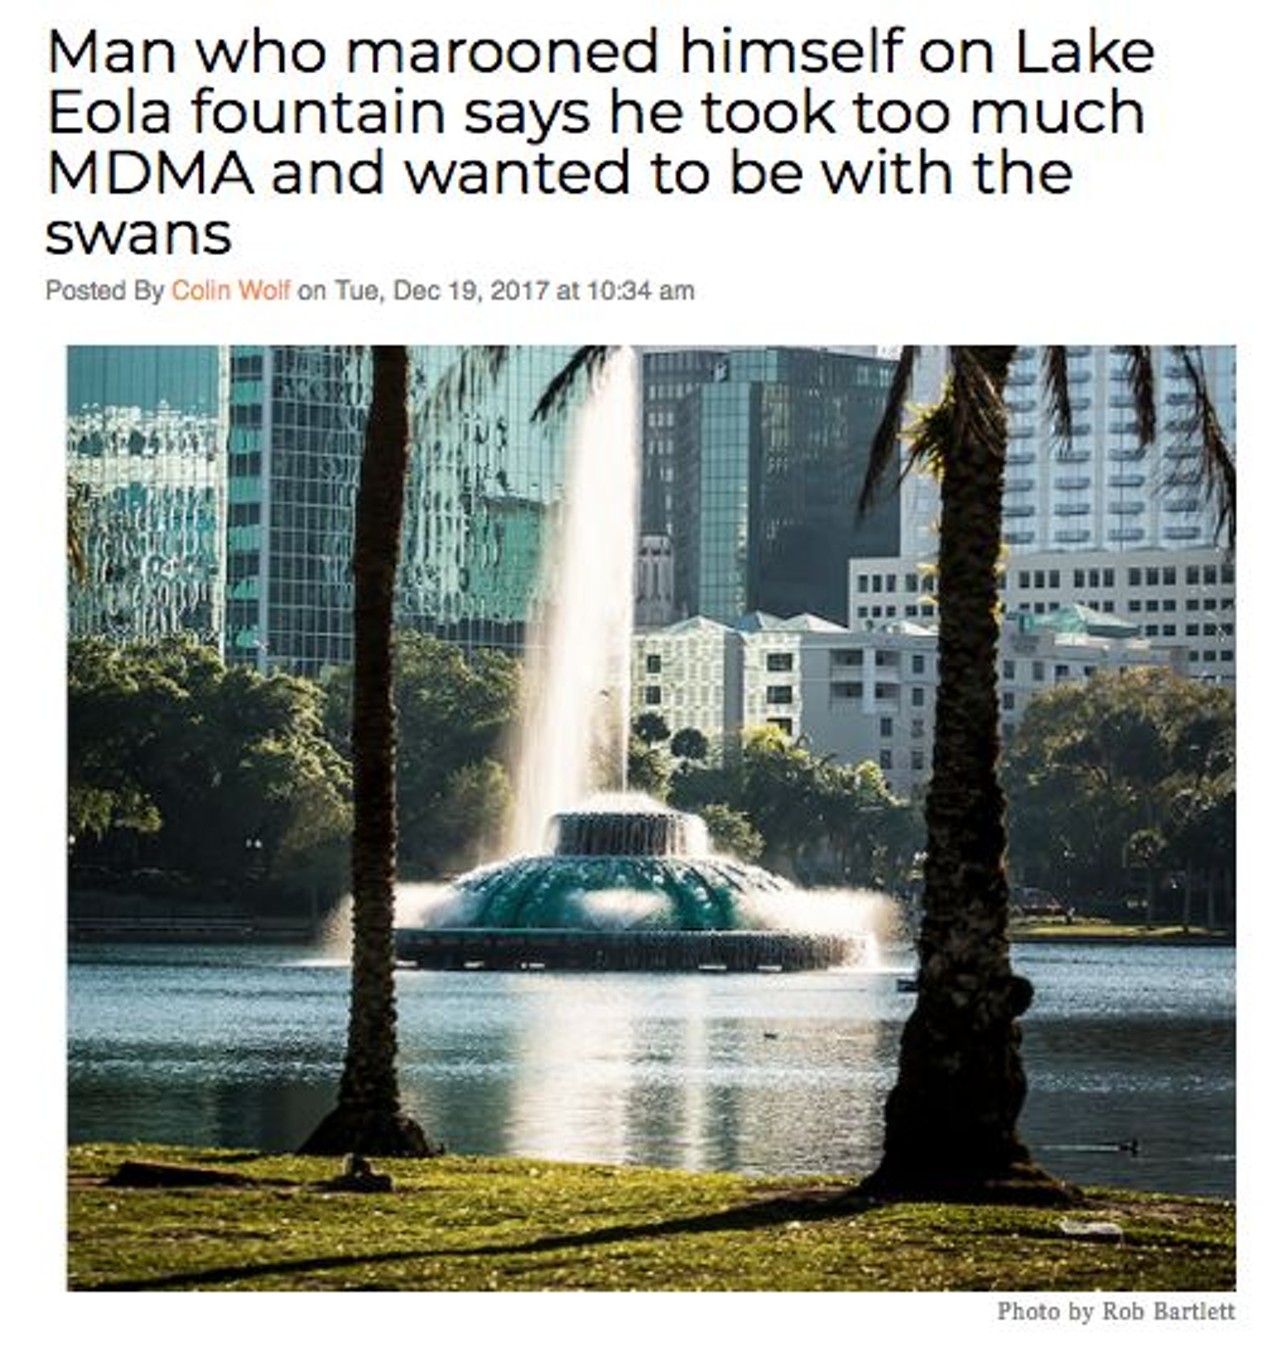 The man who stole a swan boat and stranded himself on the fountain at Lake Eola told police he ingested a large quantity of molly and wanted to be with the swans because "they don't judge him."  Read more